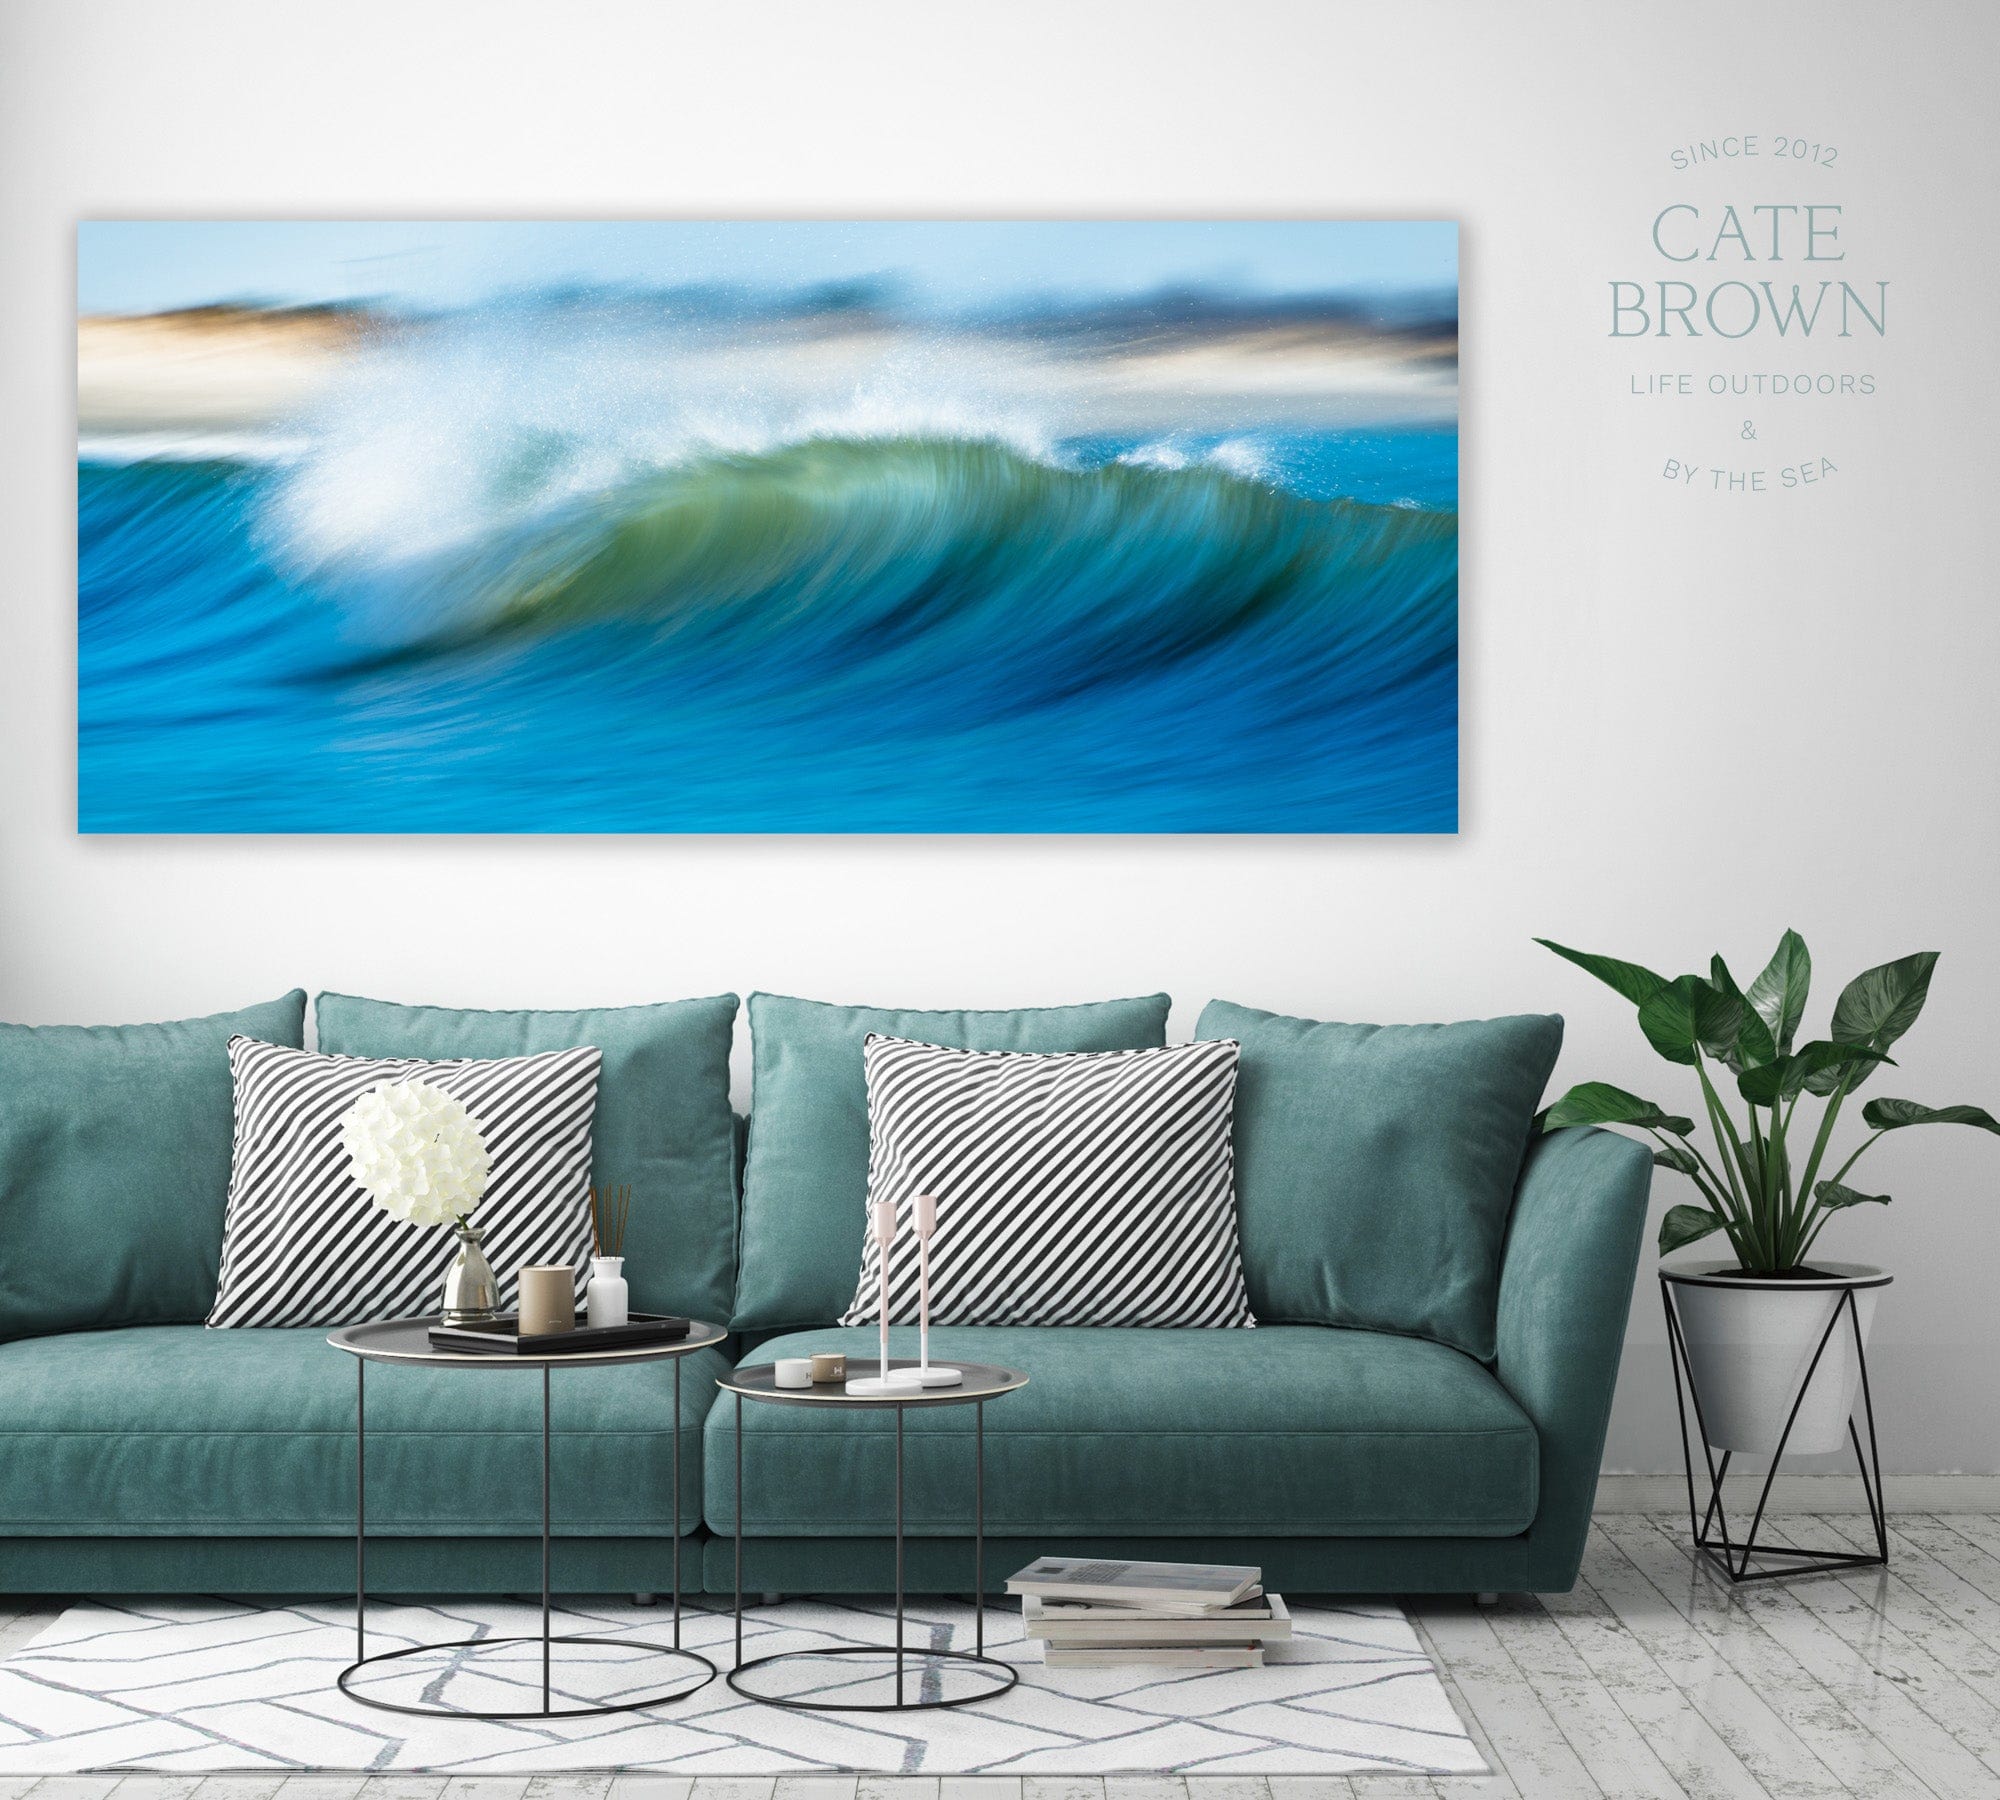 Cate Brown Photo Barreling Blue  //  Seascape Photography Made to Order Ocean Fine Art